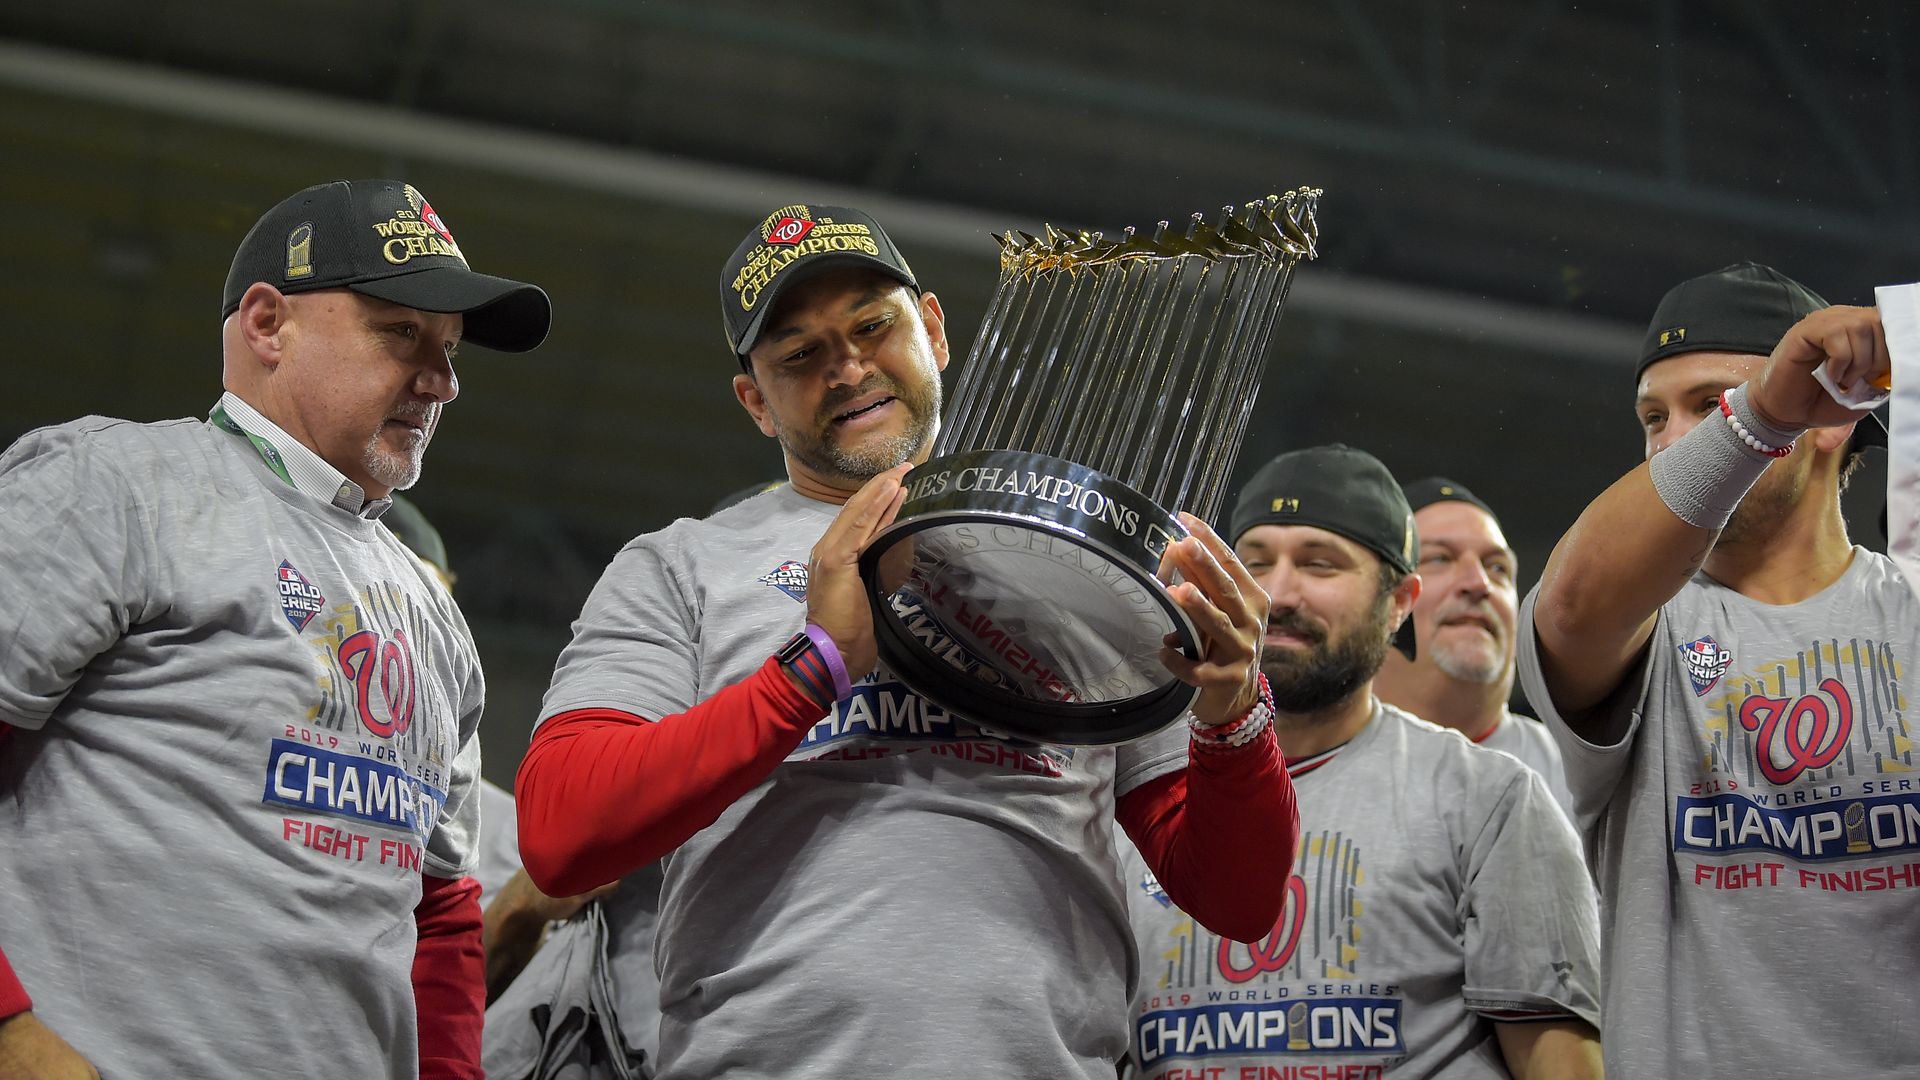 Members of the Washington Nationals hold their championship trophy.